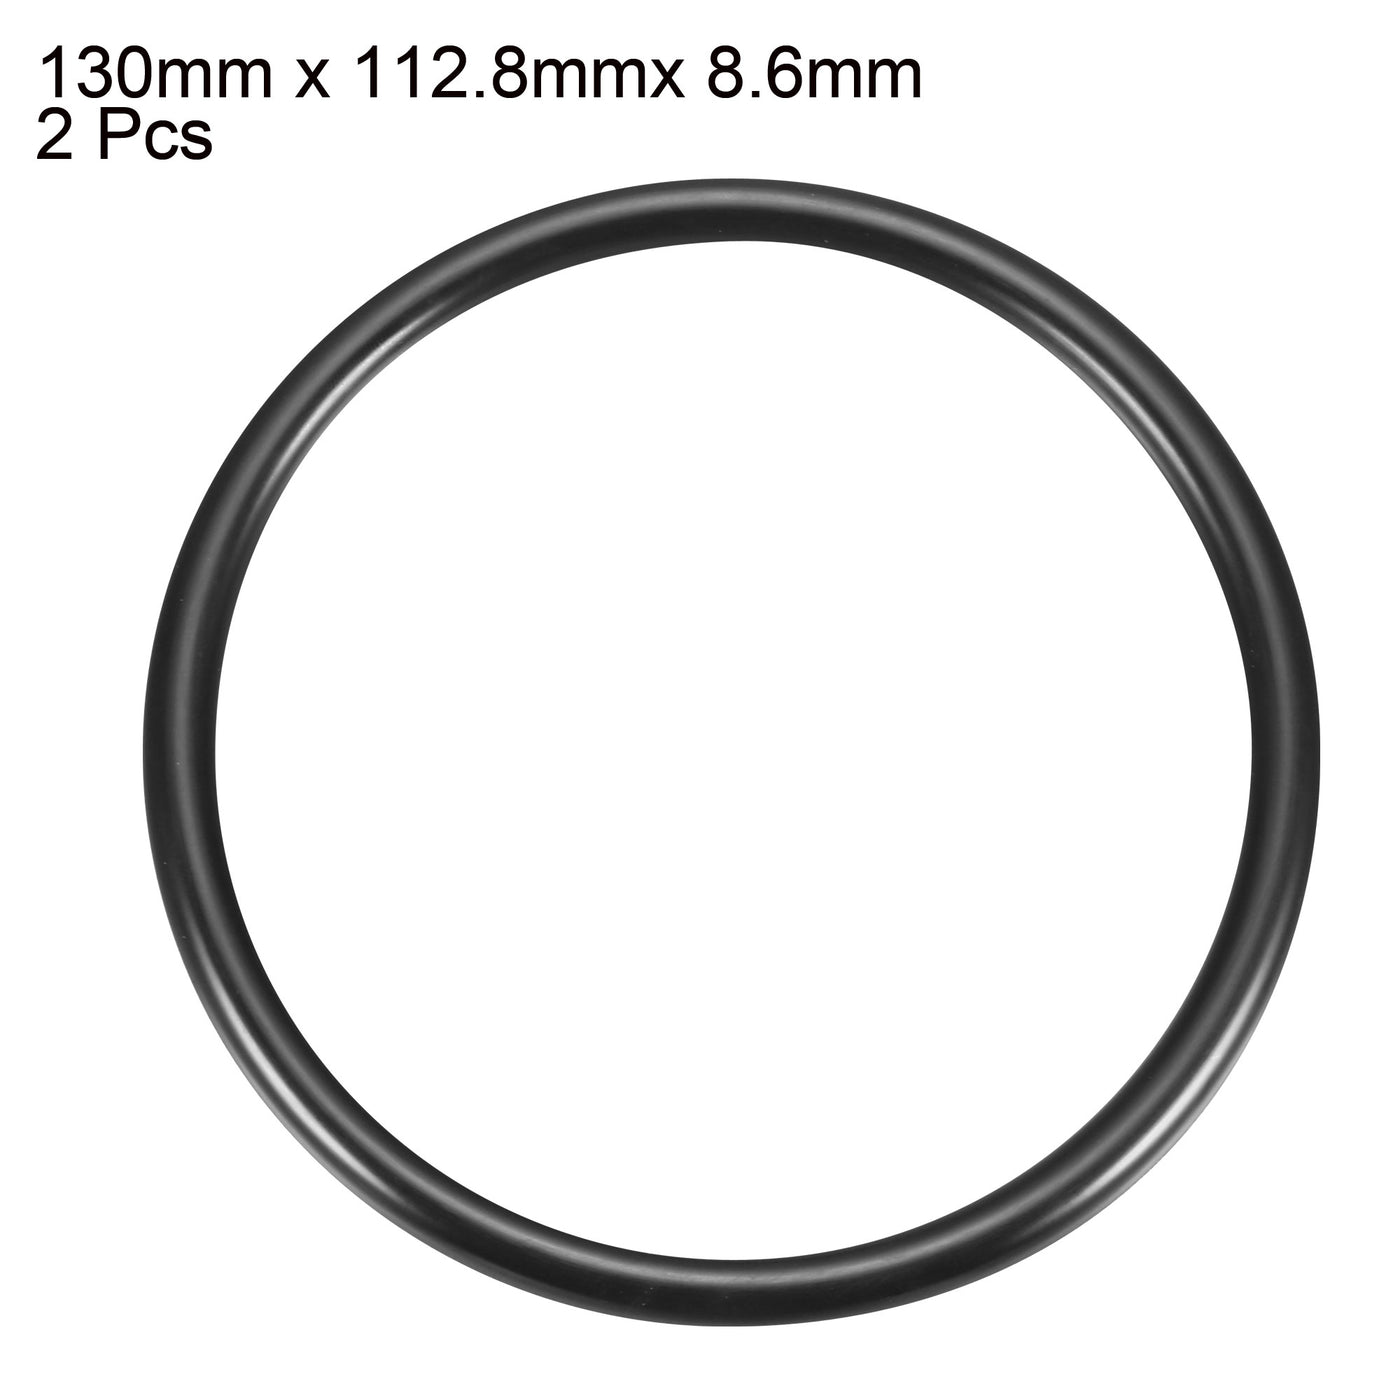 uxcell Uxcell 2pcs Black 22mm Outer Dia 1.9mm Thickness Sealing Ring O-shape Rubber Grommet